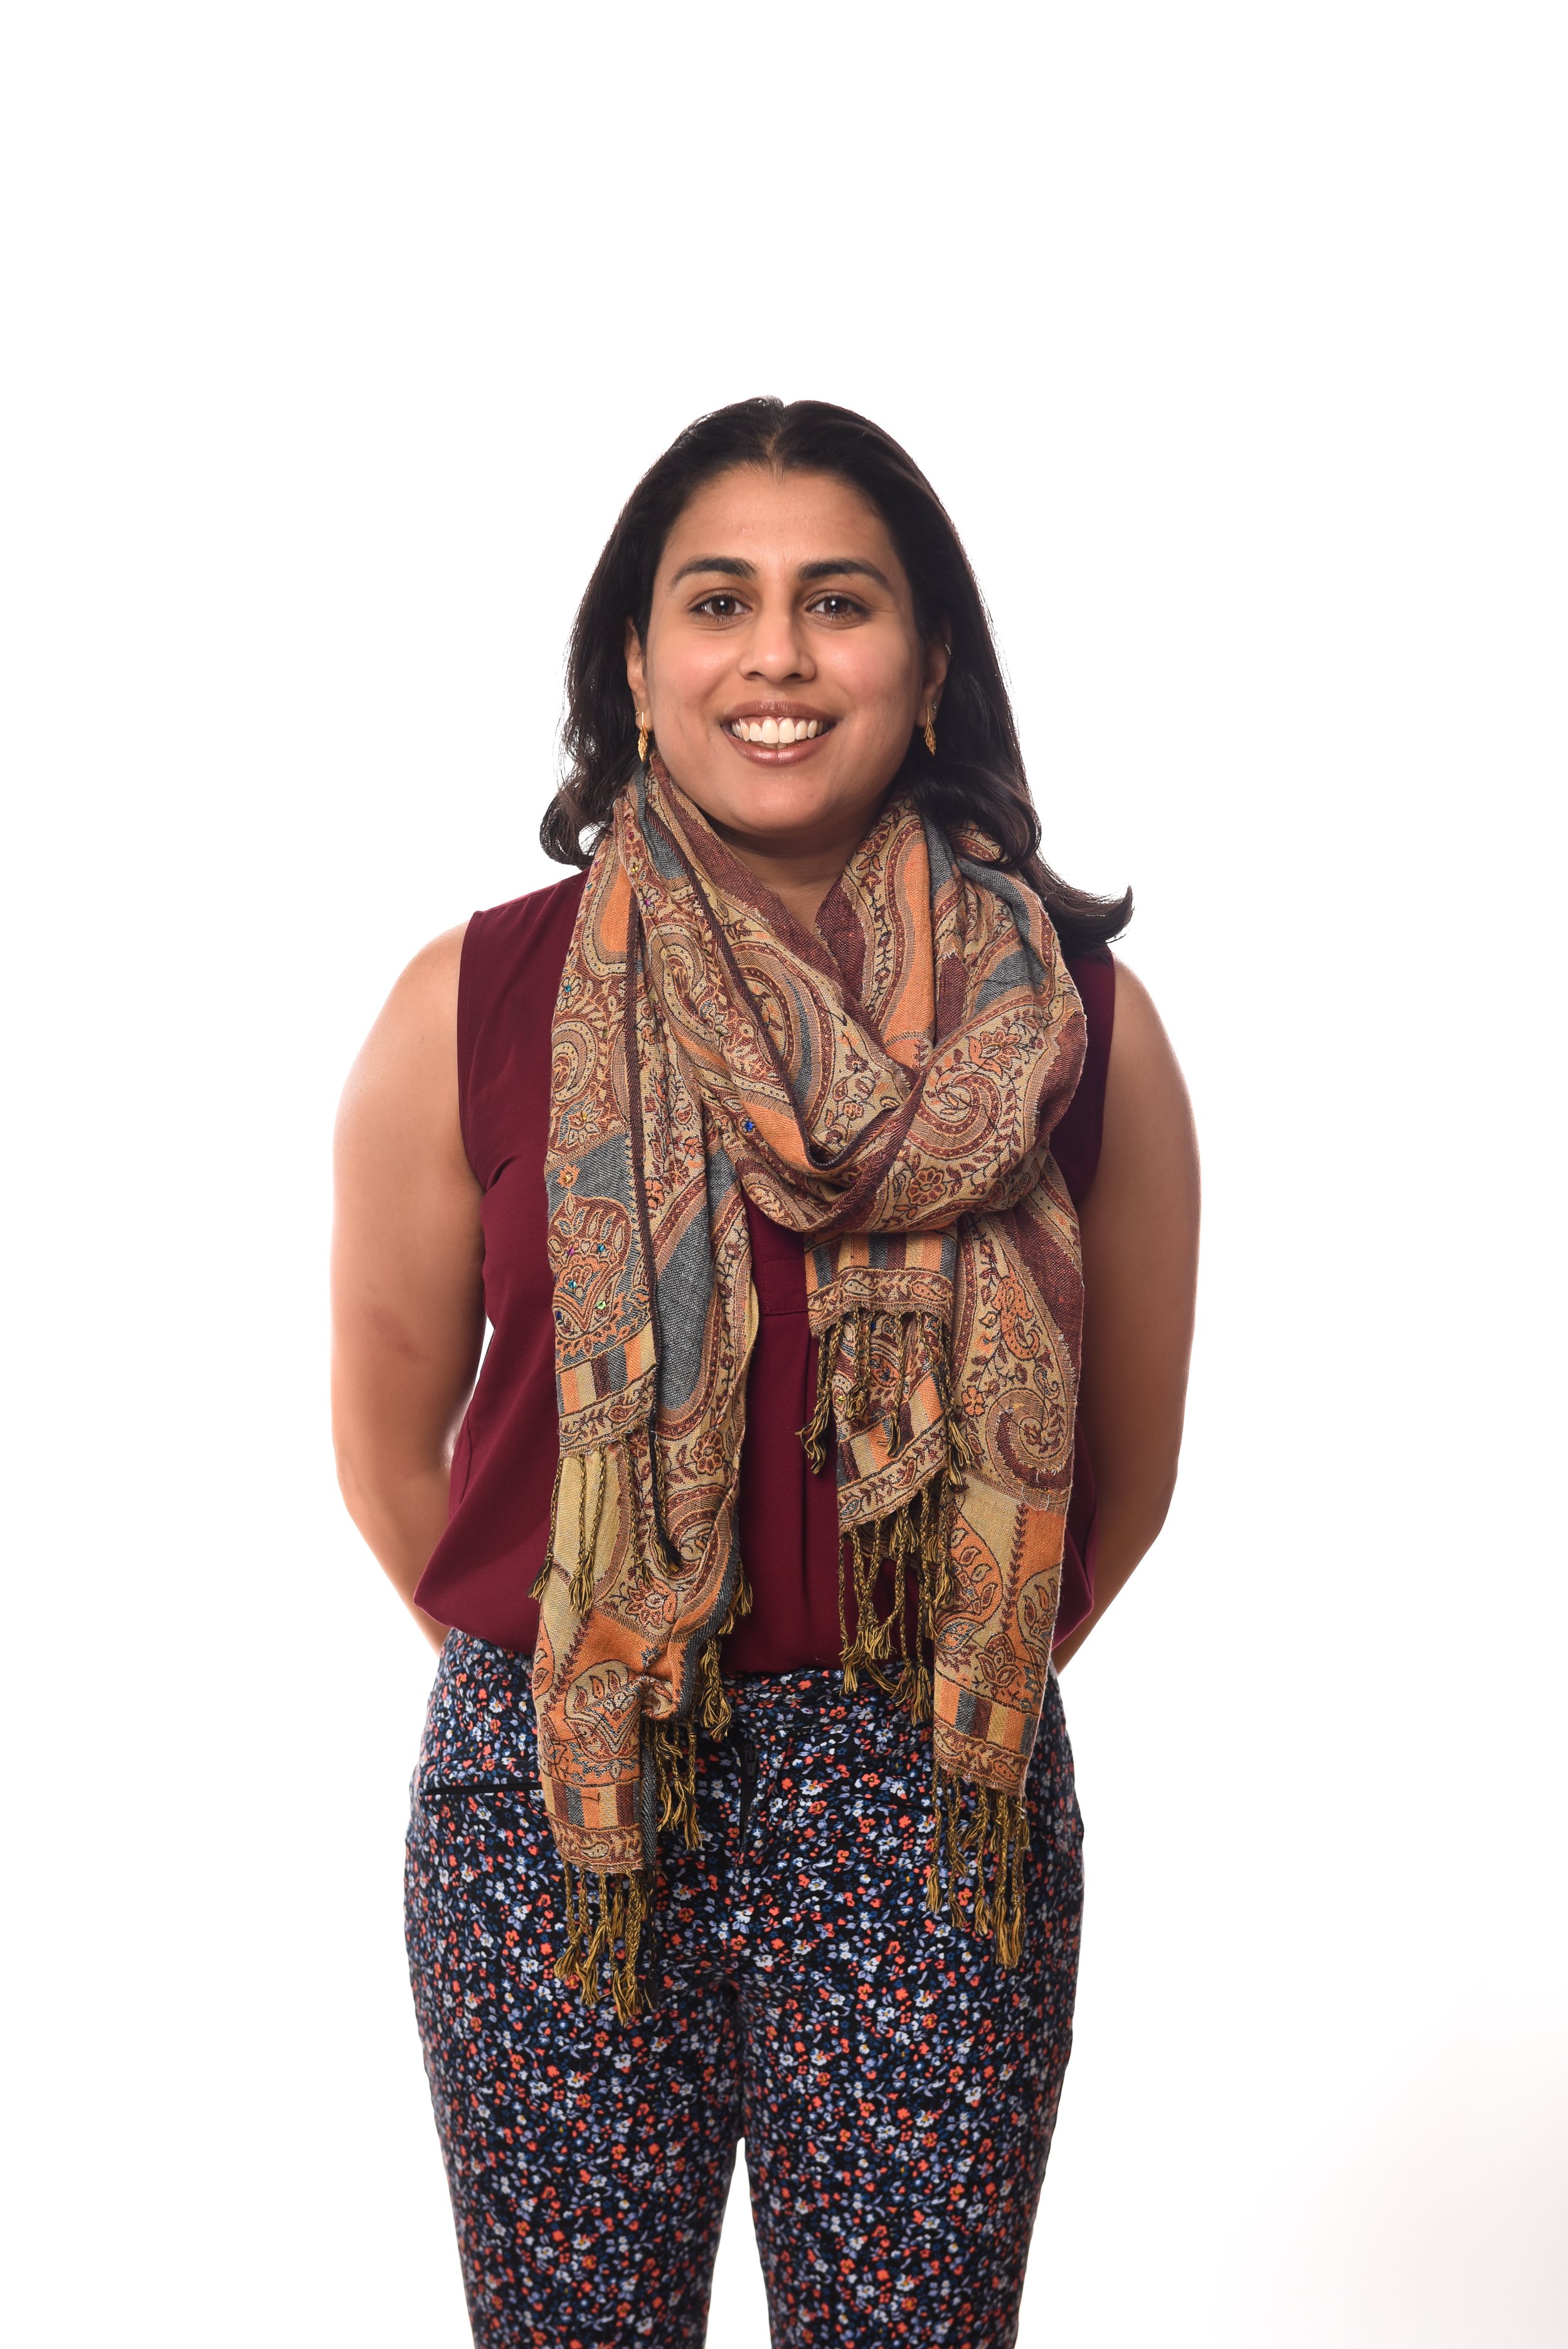 Shilpa Agrawal - Computer Science Department Chair